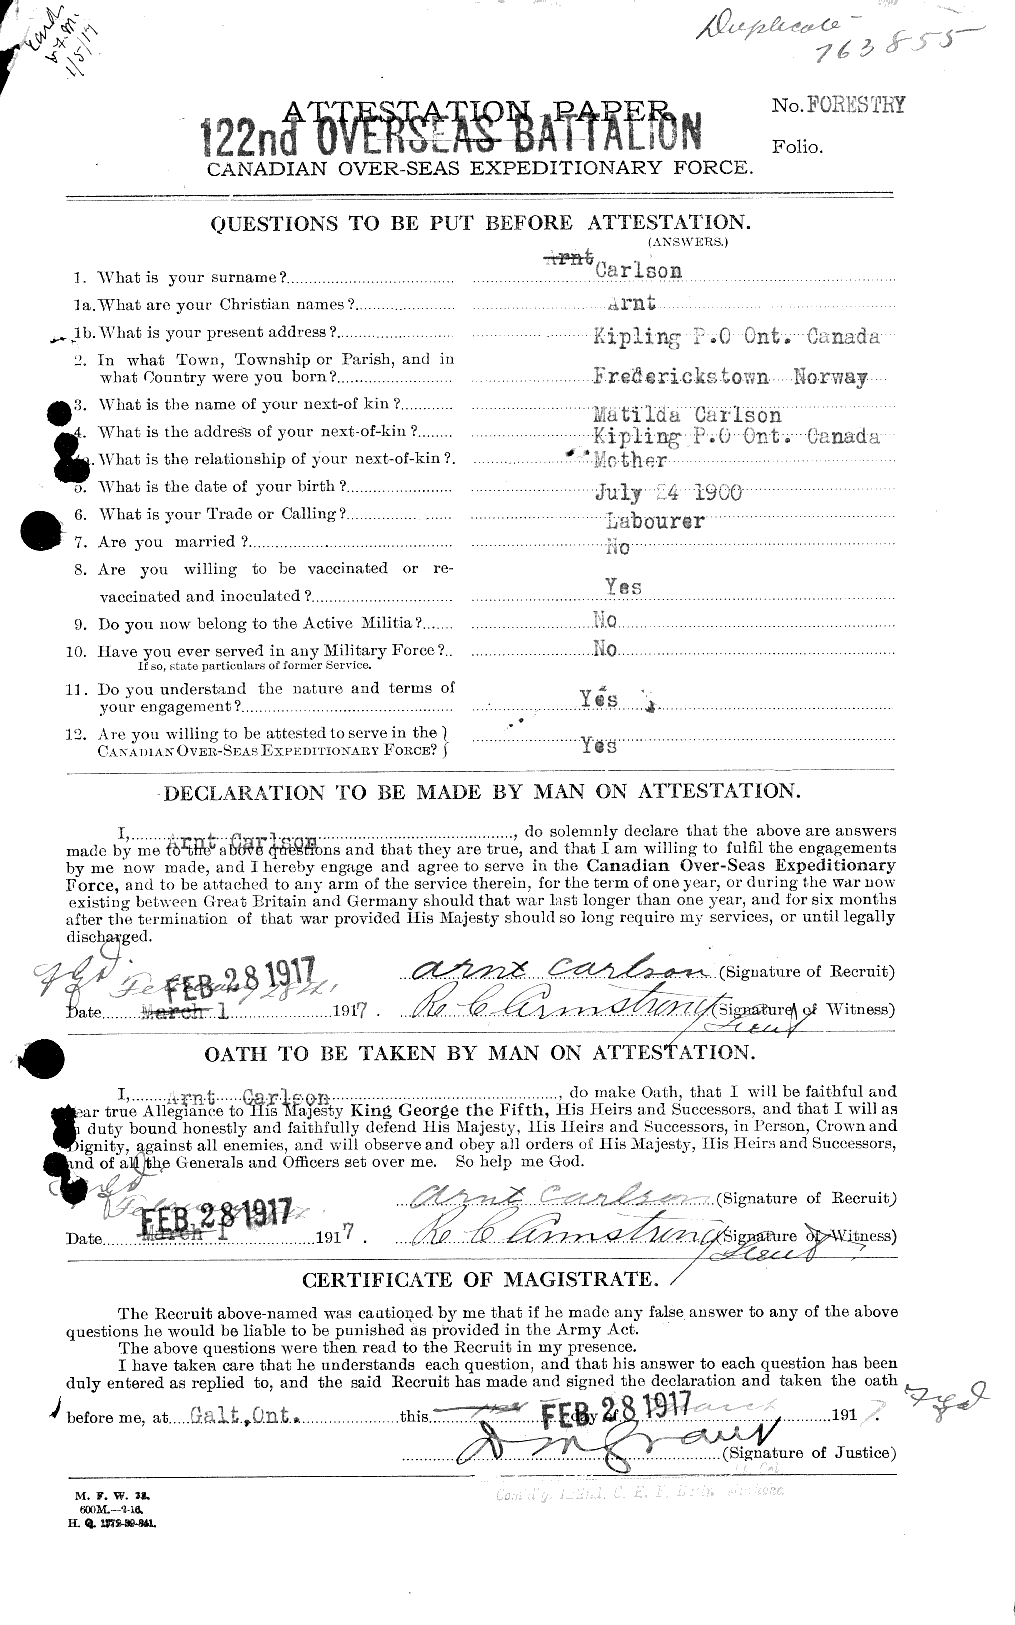 Personnel Records of the First World War - CEF 004481a